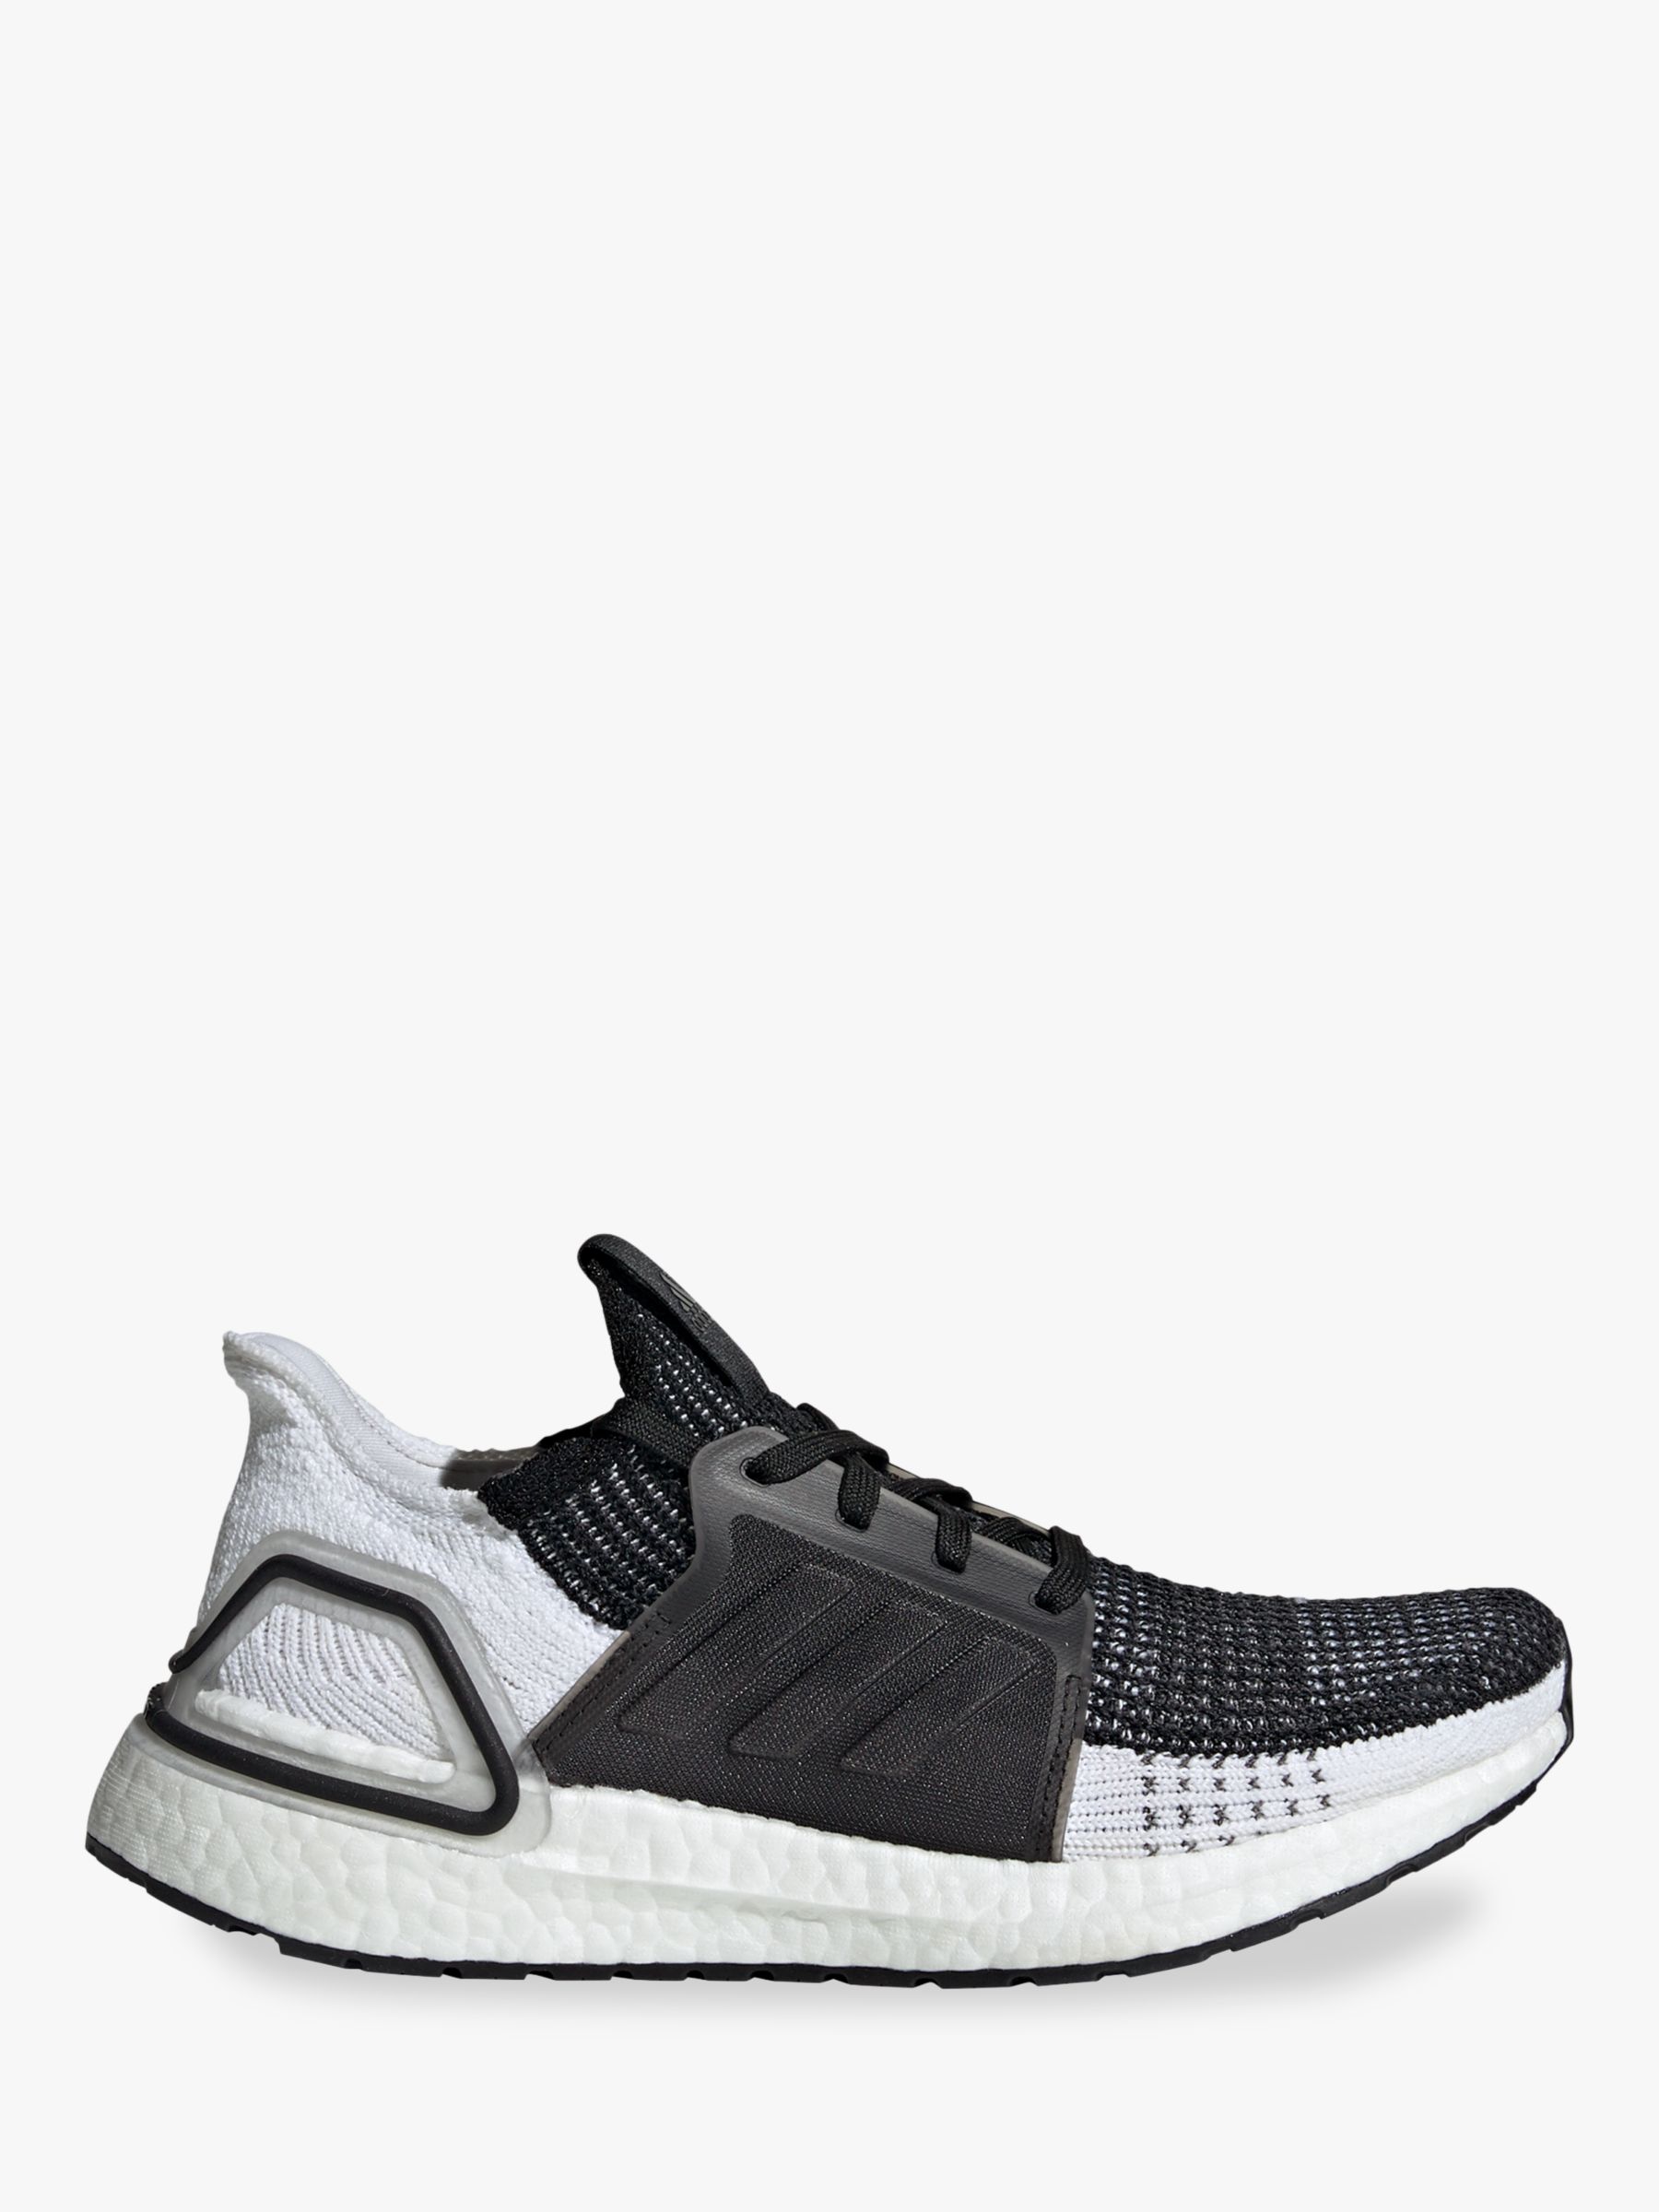 ultra boost 19 size 6